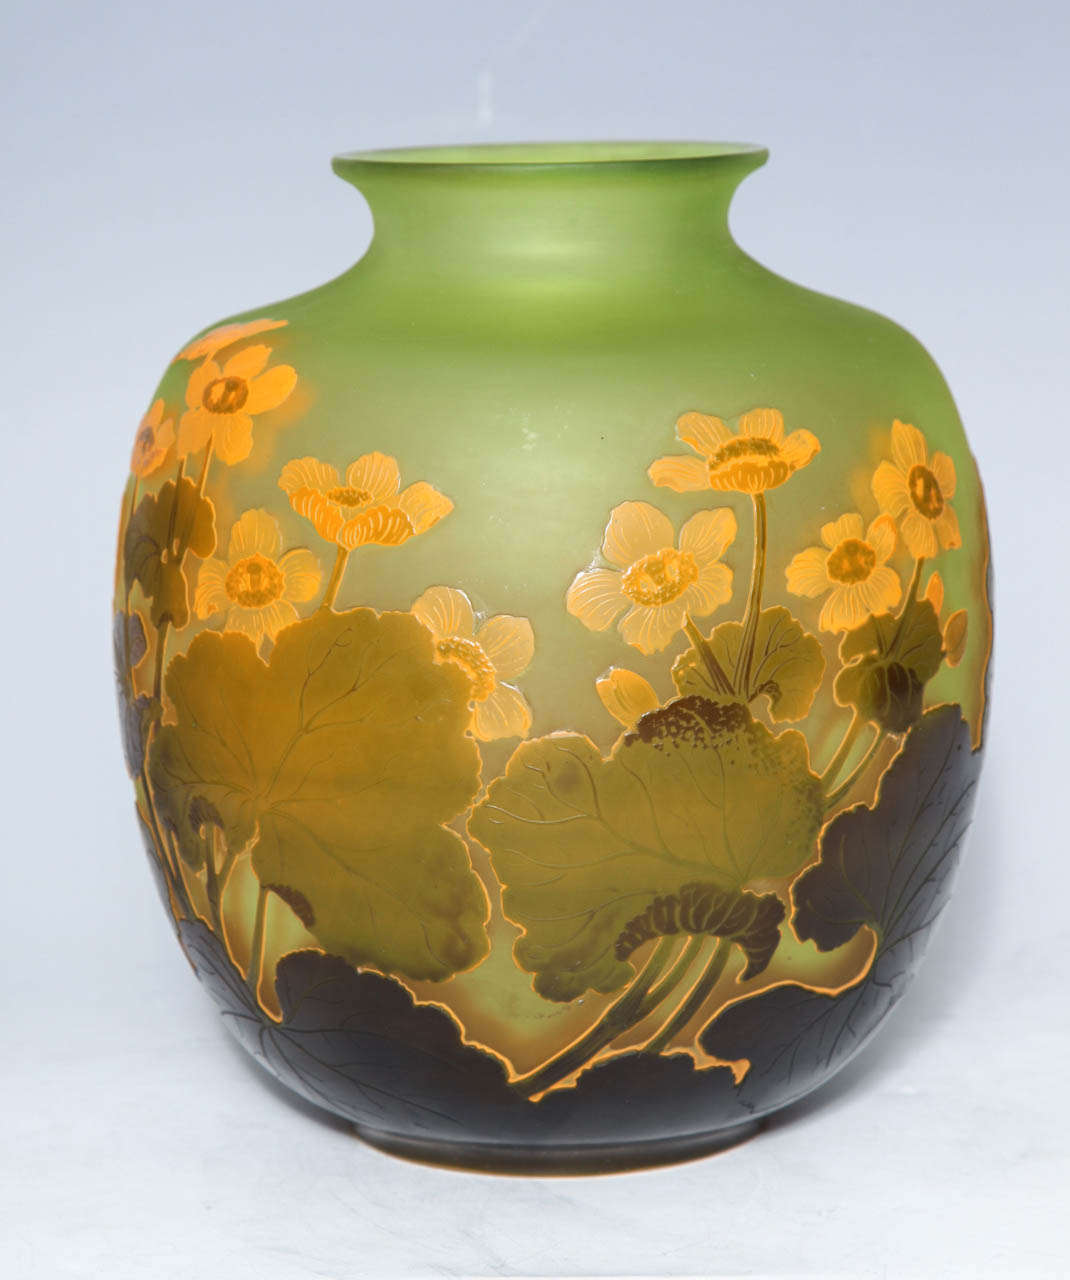 A Fine Antique French Cameo Glass Double Overlay Jade Green Vase by Emile Galle circa 1890

Emile Galle was one of the foremost artists of the Art Nouveau period. He invented may of the glass making techniques that he and his associates used to